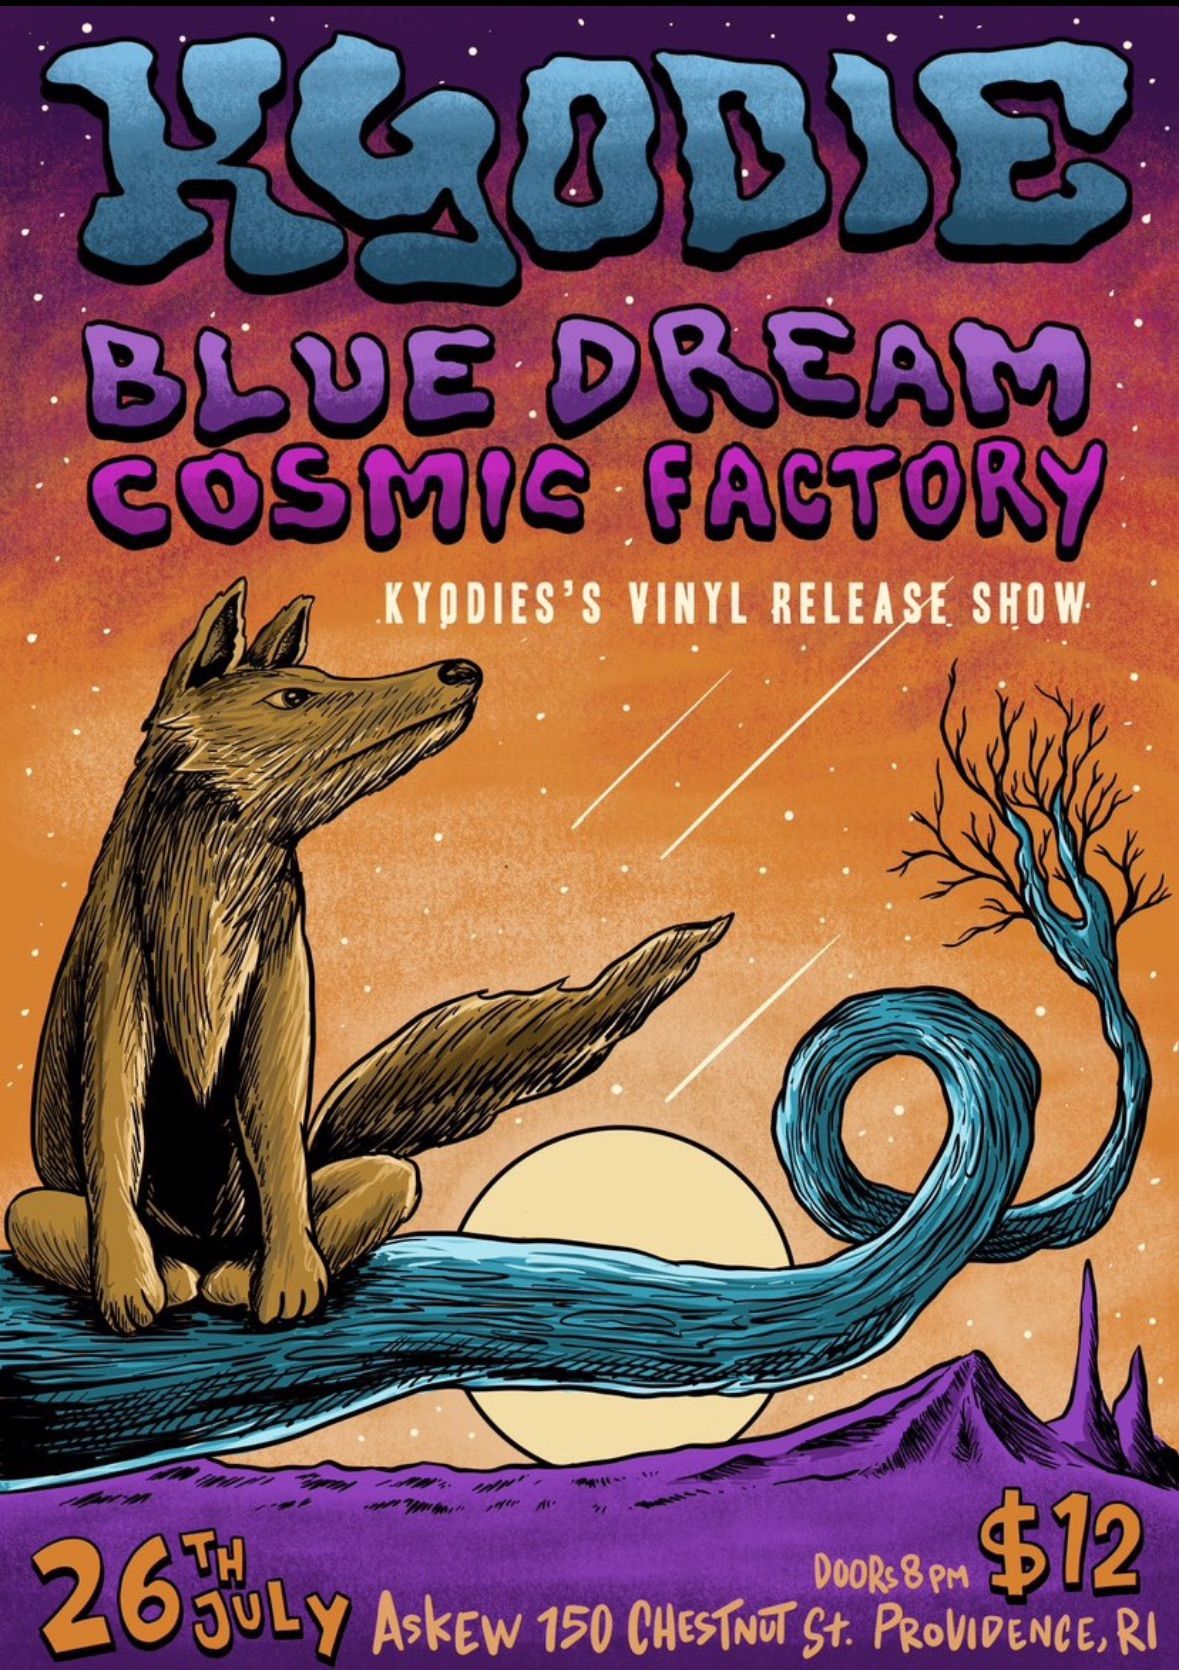 Kyodie, The Cosmic Factory, Blue Dream at Askew